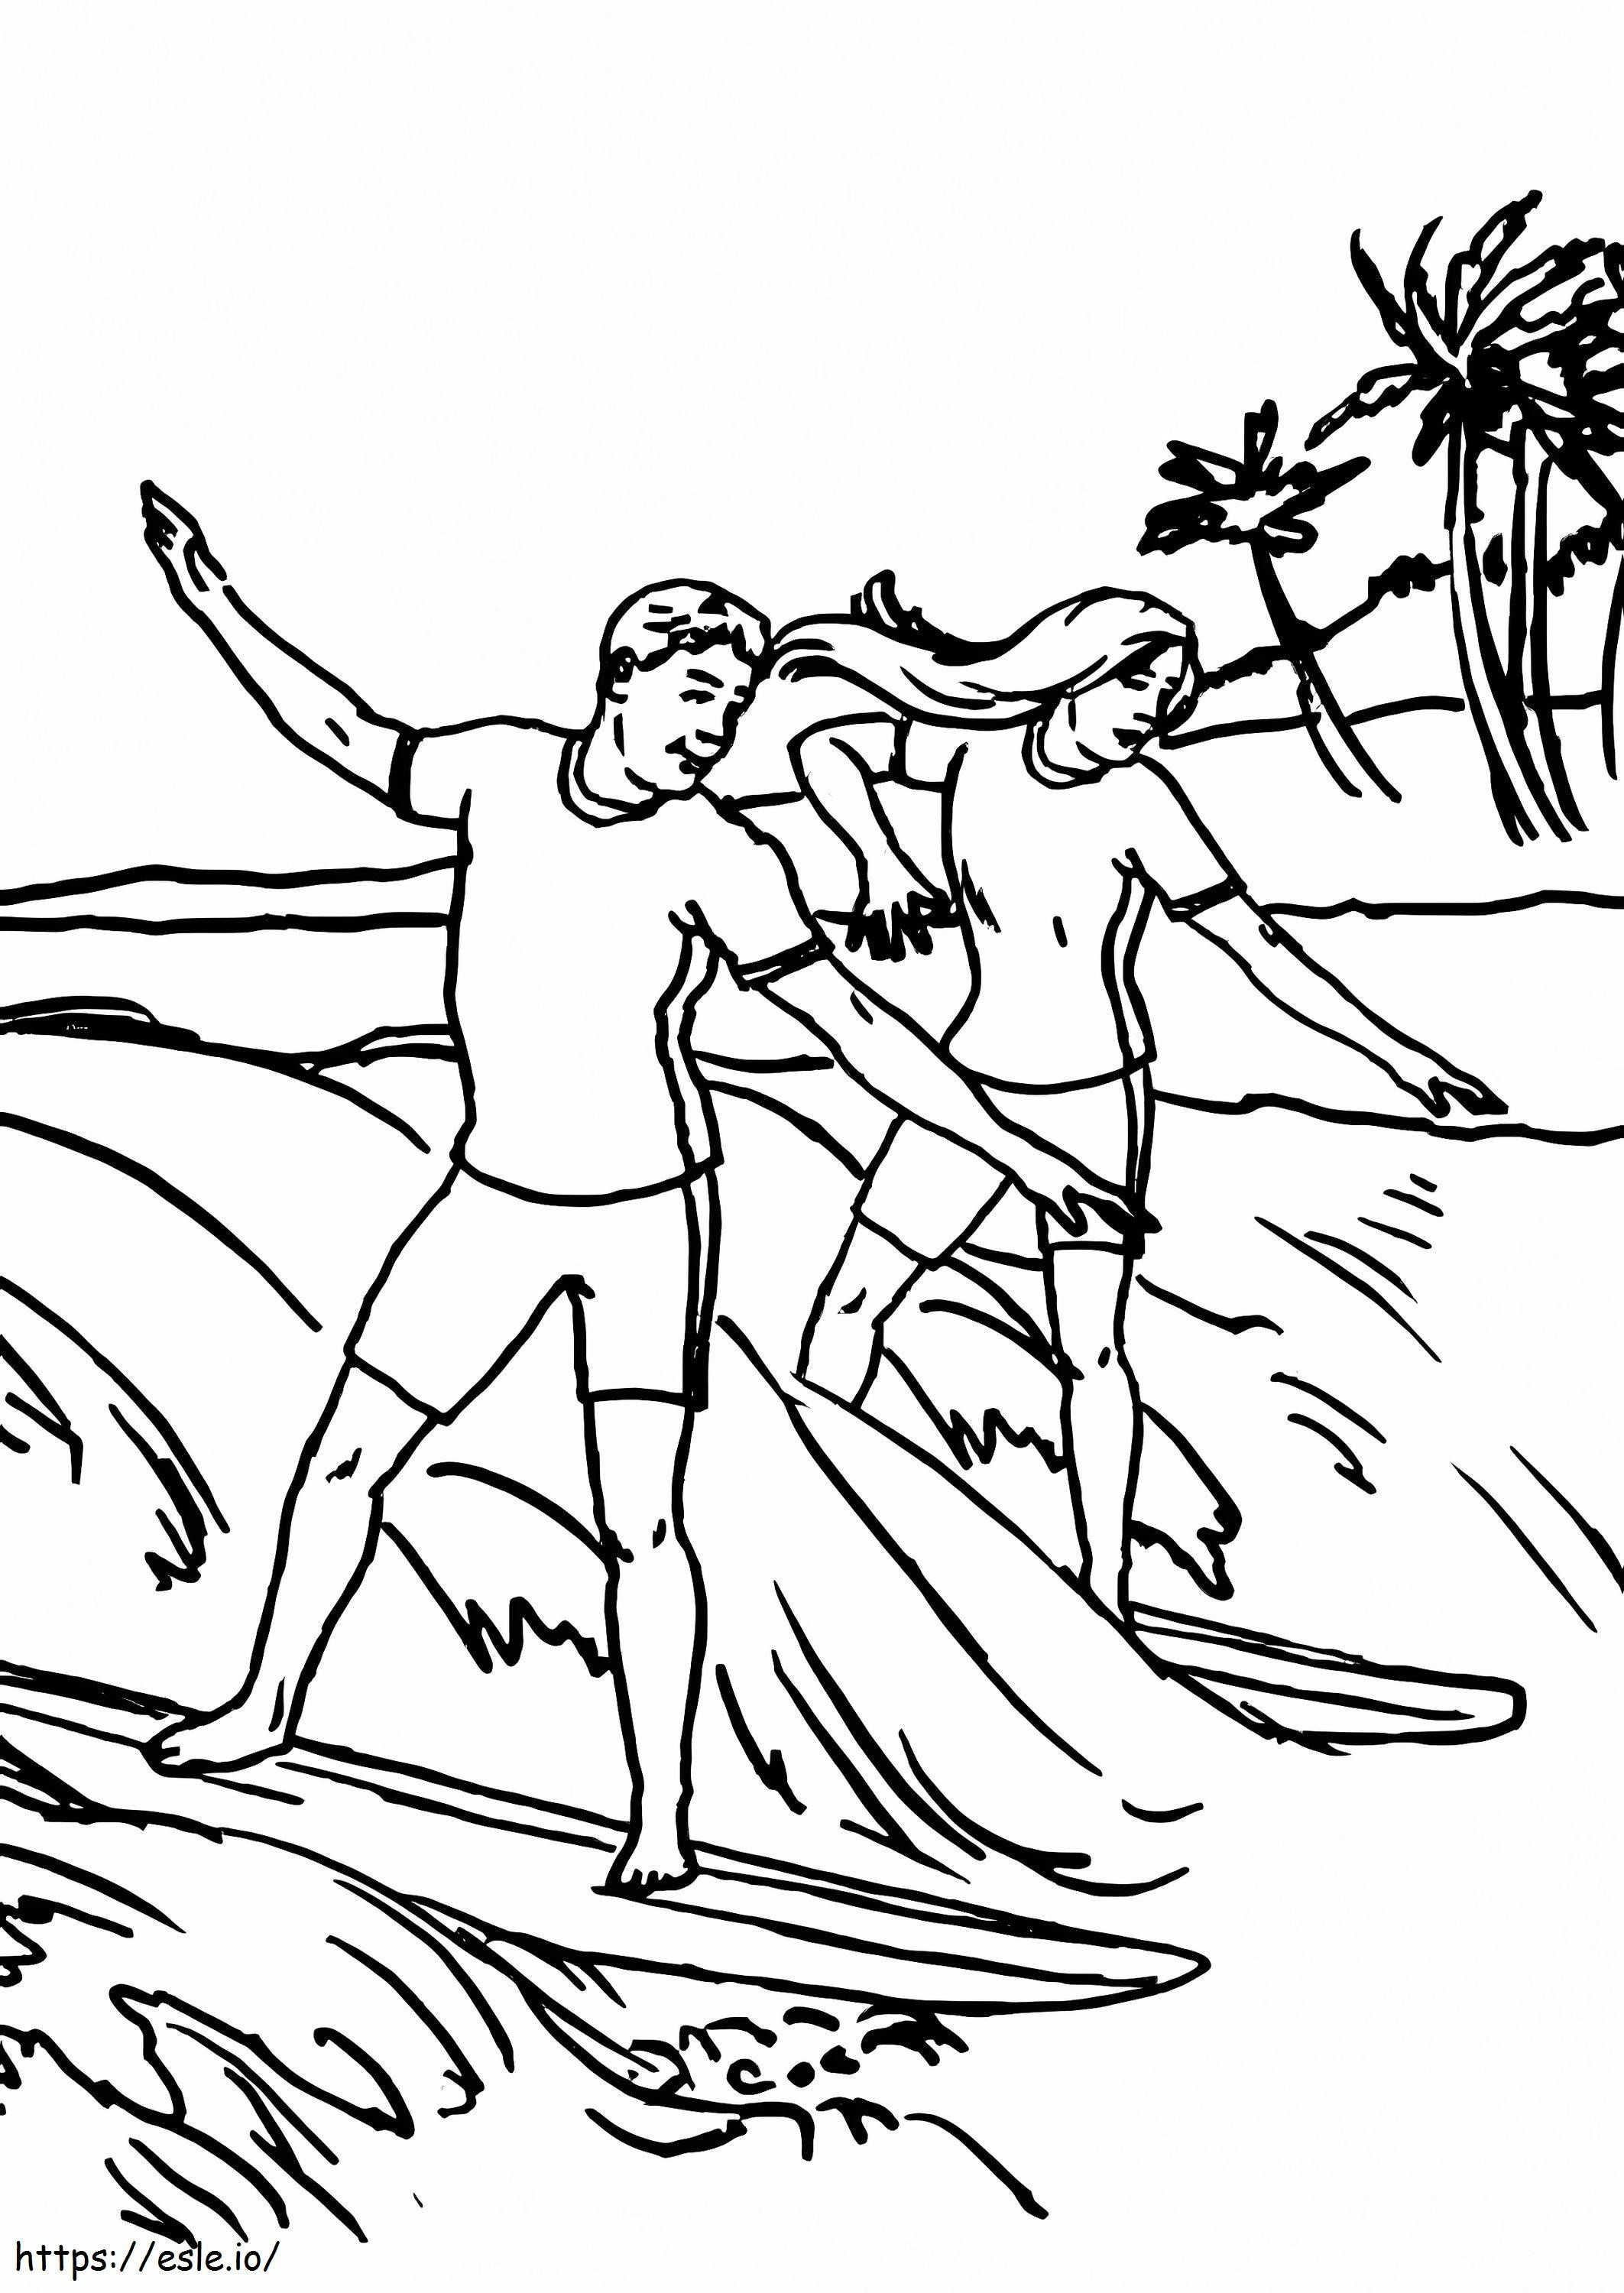 Couple Surfing coloring page